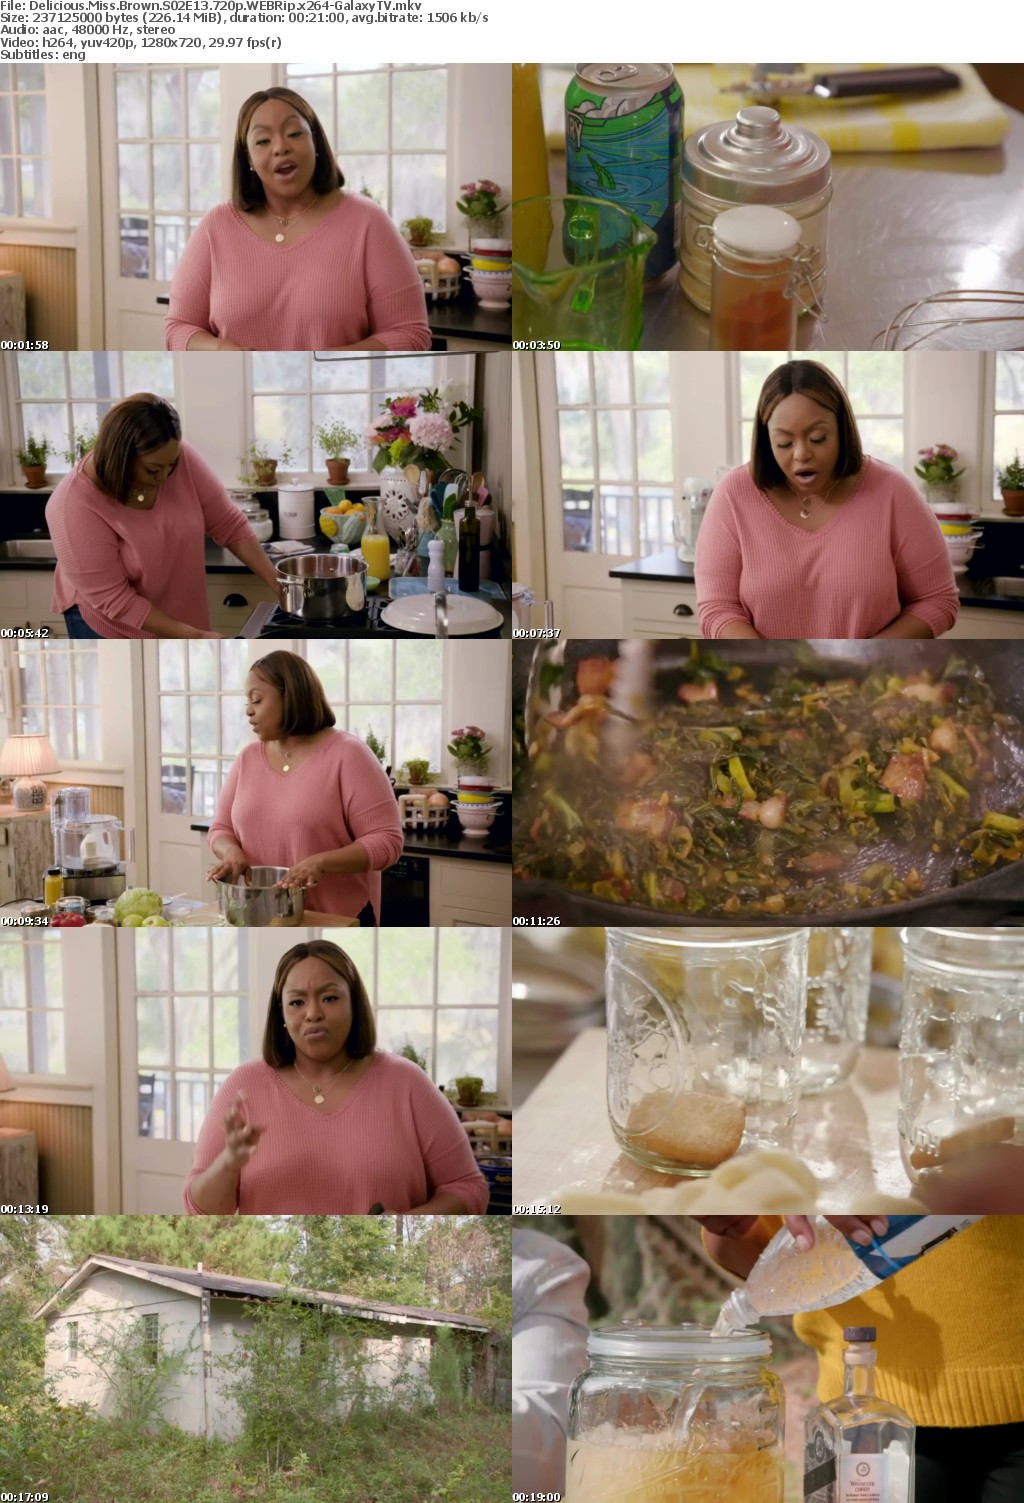 Delicious Miss Brown S02 COMPLETE 720p WEBRip x264-GalaxyTV